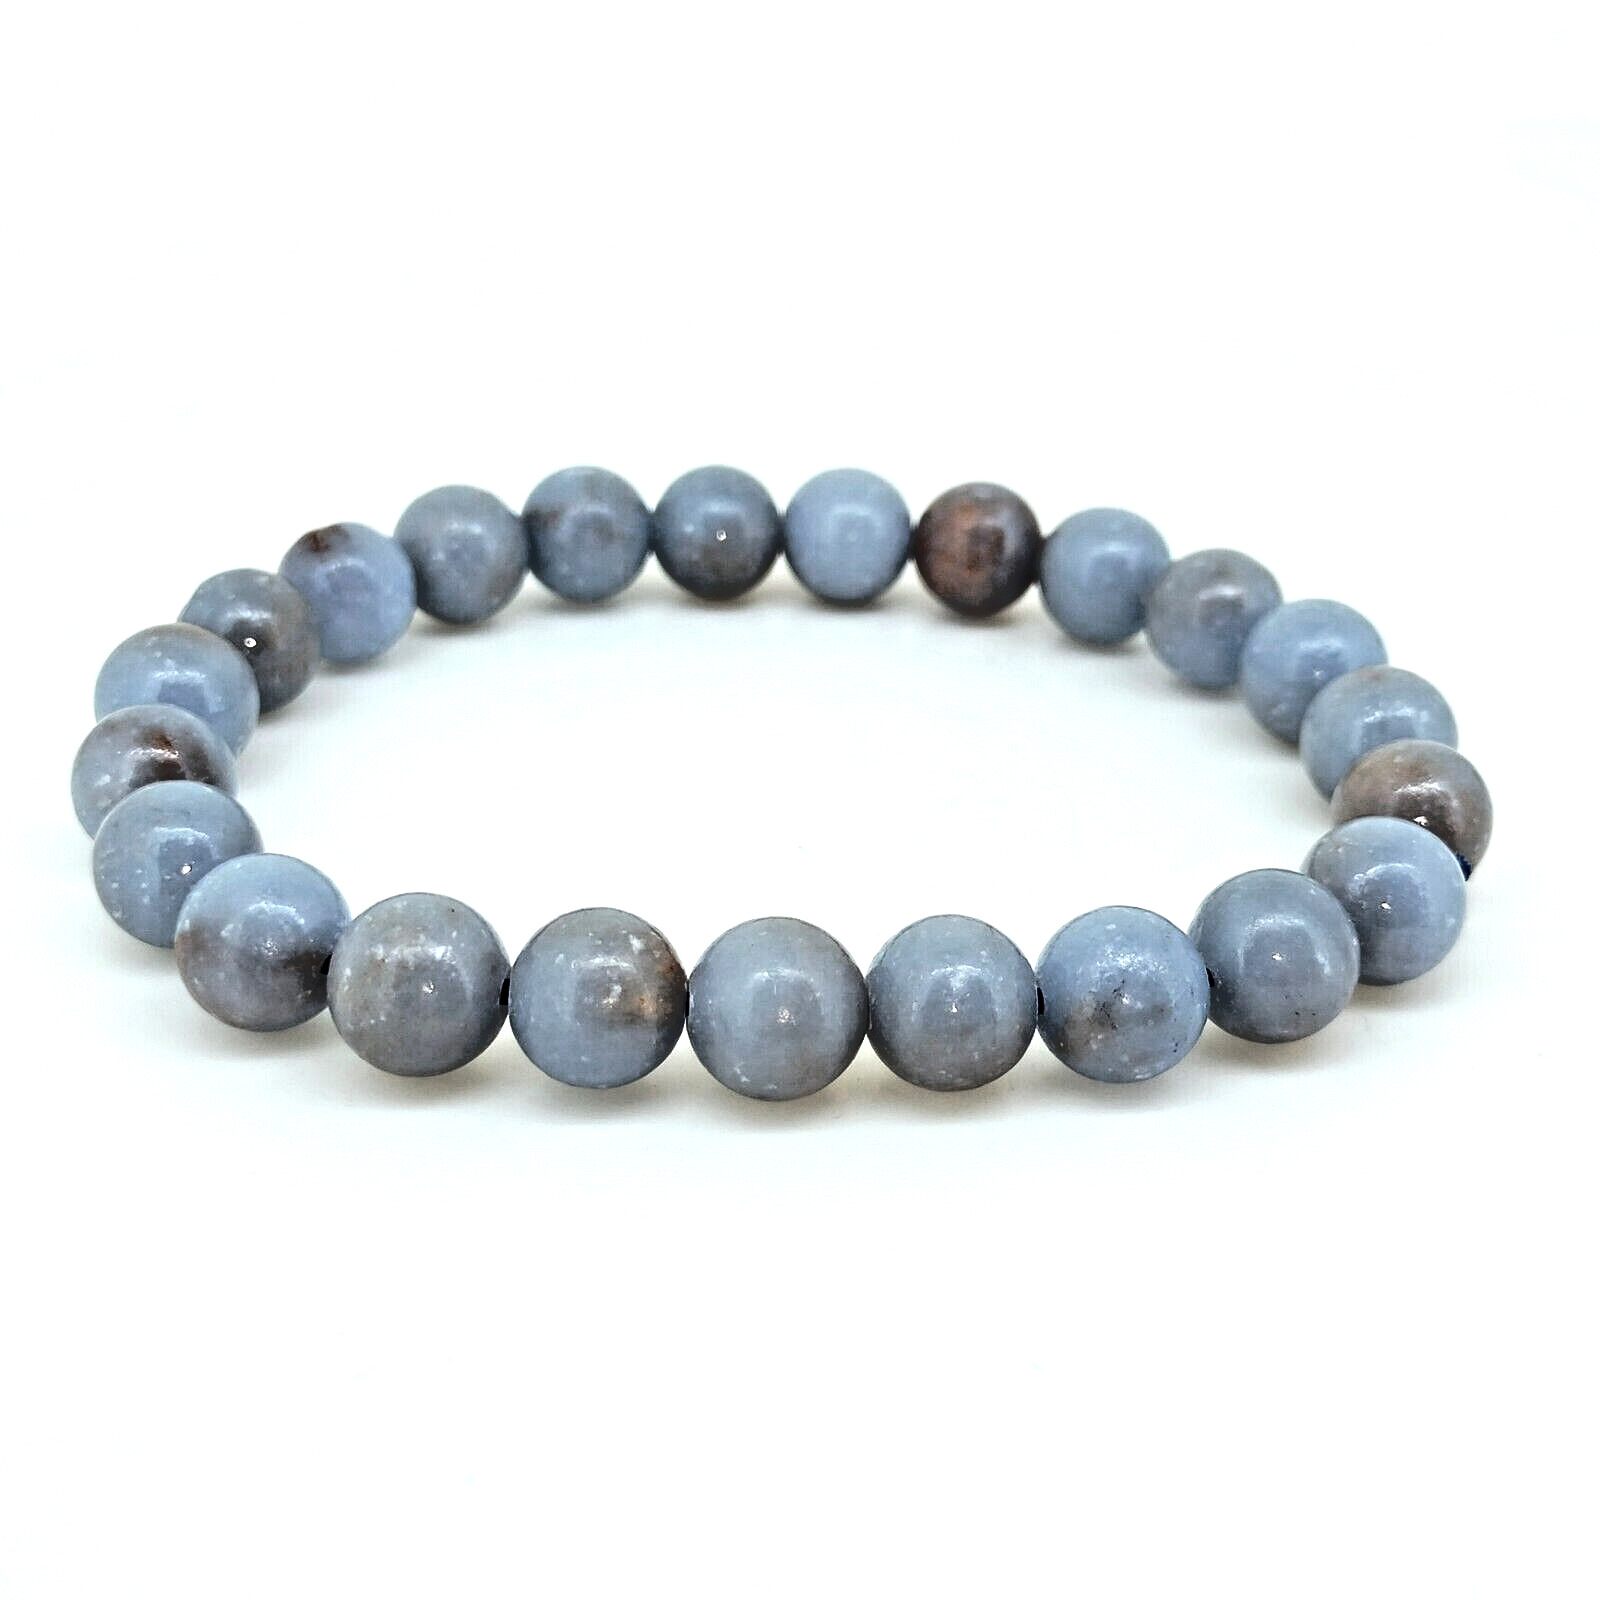 8 MM Natural Amazonite Cystal Beads Chakra Stretchy Healing Charm Bracelet 7.2In